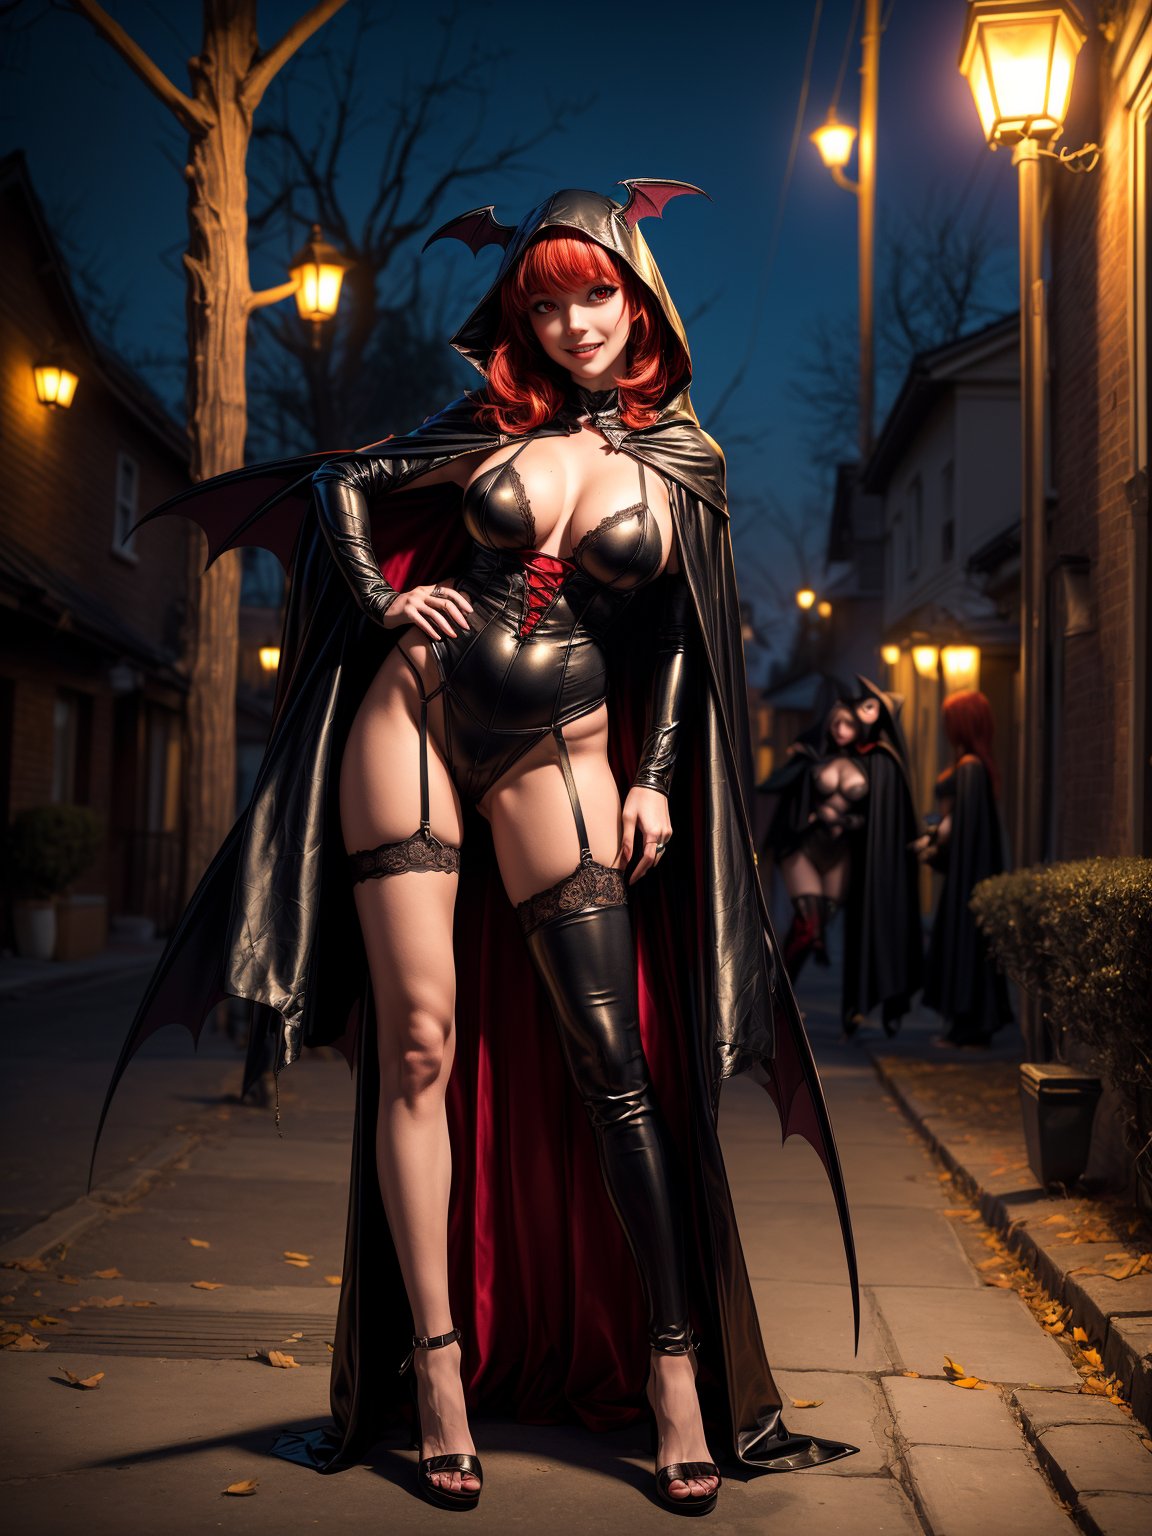 ((1woman)), ((wearing erotic vampire costume, with long cape, bat wings on head, very pale and whitish skin)), ((gigantic breasts)), ((short red hair, hair with bangs in front of the eyes)), ((staring at the viewer)), ((leaning against [front, tall mailbox striking erotic pose, feet on the ground | leaning against one, wooden cards stuck on the floor doing erotic pose])),  ((in a small neighborhood, halloween party, multiple people with different costumes in the neighborhood, is at night, lampposts illuminating, the bairo)), (((full body))), 16k, UHD, (((better quality, better resolution, better detail)),